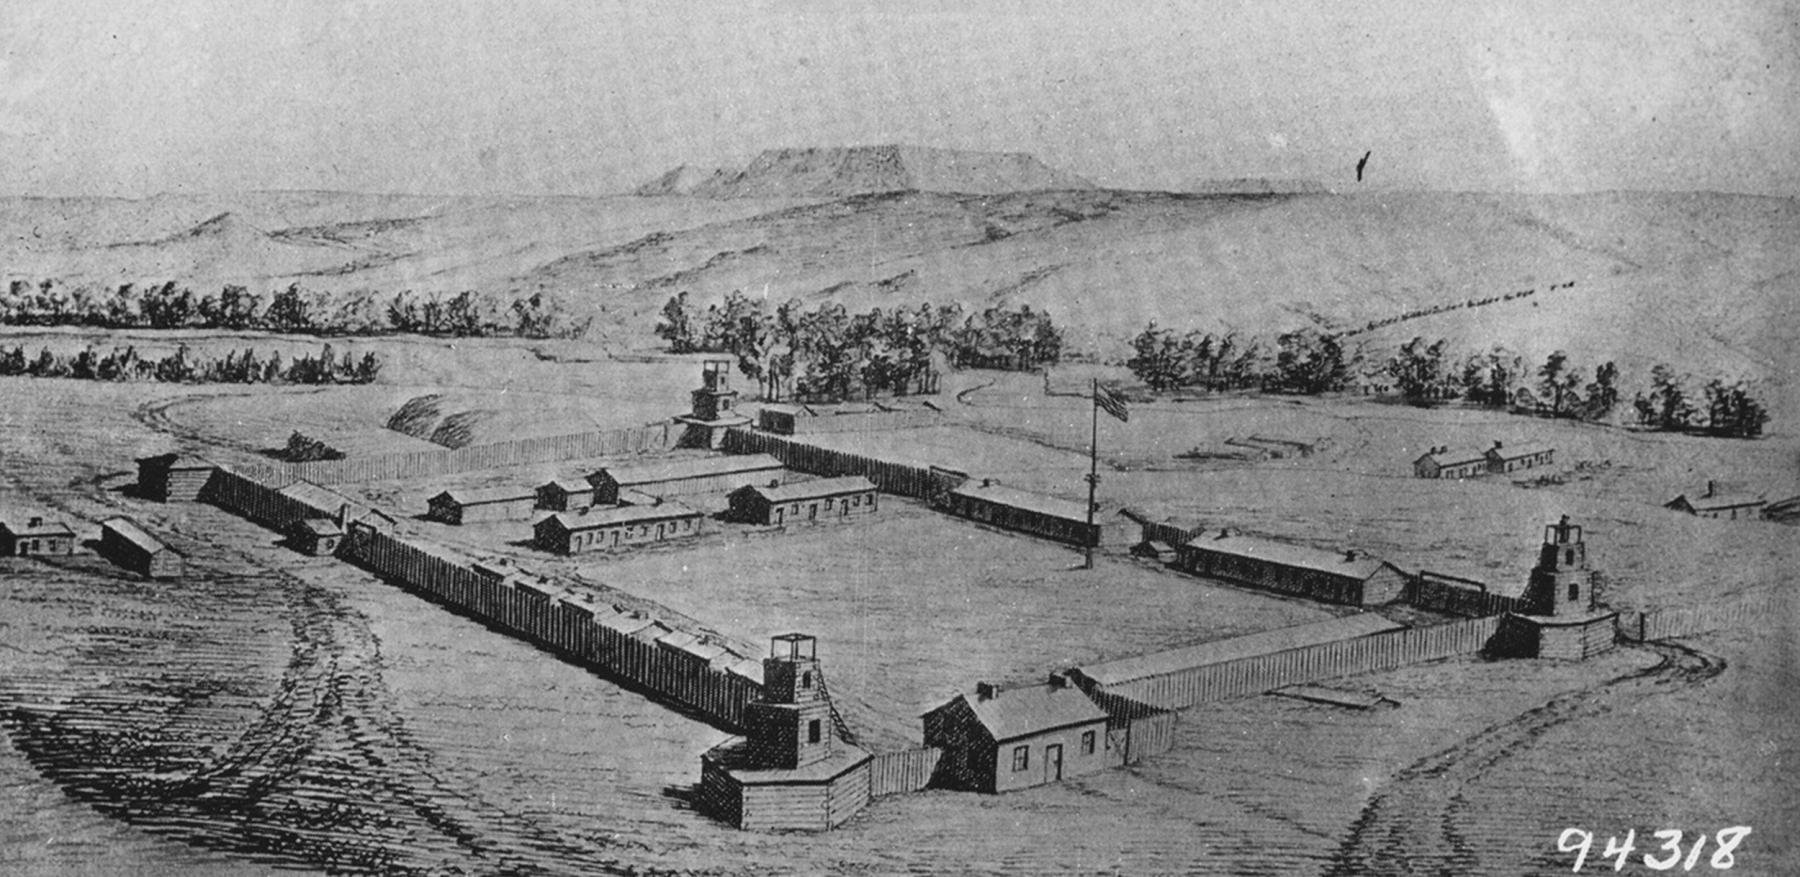 Anton Schonborn’s 1867 drawing of Fort Reno shows a much more substantial place than it would have been in 1865, when the Sawyers Expedition passed through and left Capt. George Williford to take command of the garrison. American Heritage Center, University of Wyoming.